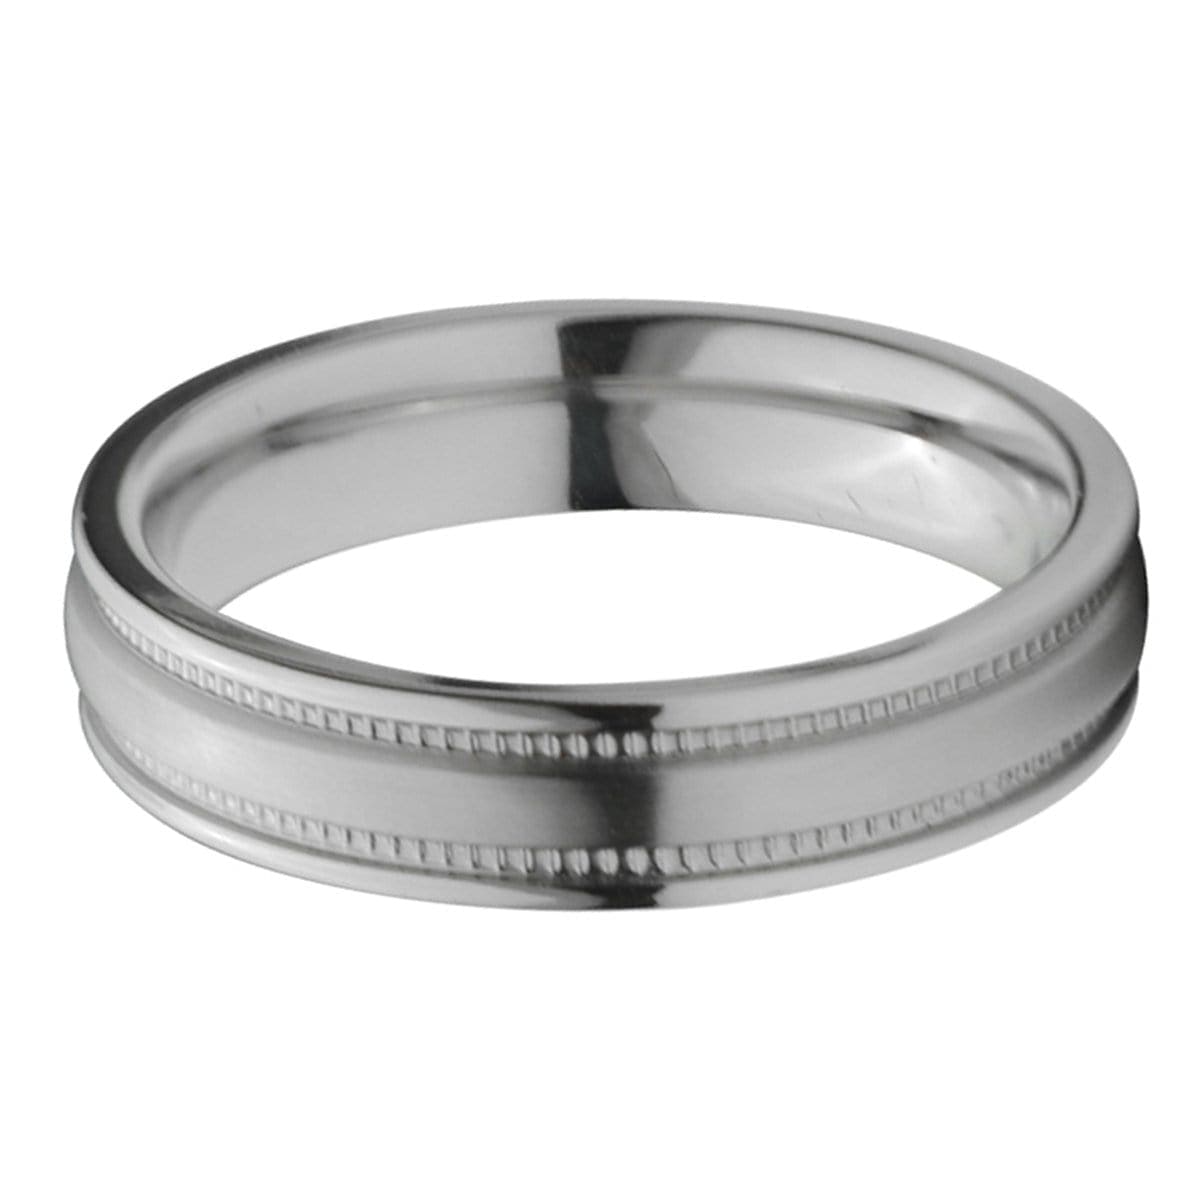 INOX JEWELRY Rings Silver Tone Titanium 5mm Fancy Groove Border Band Ring